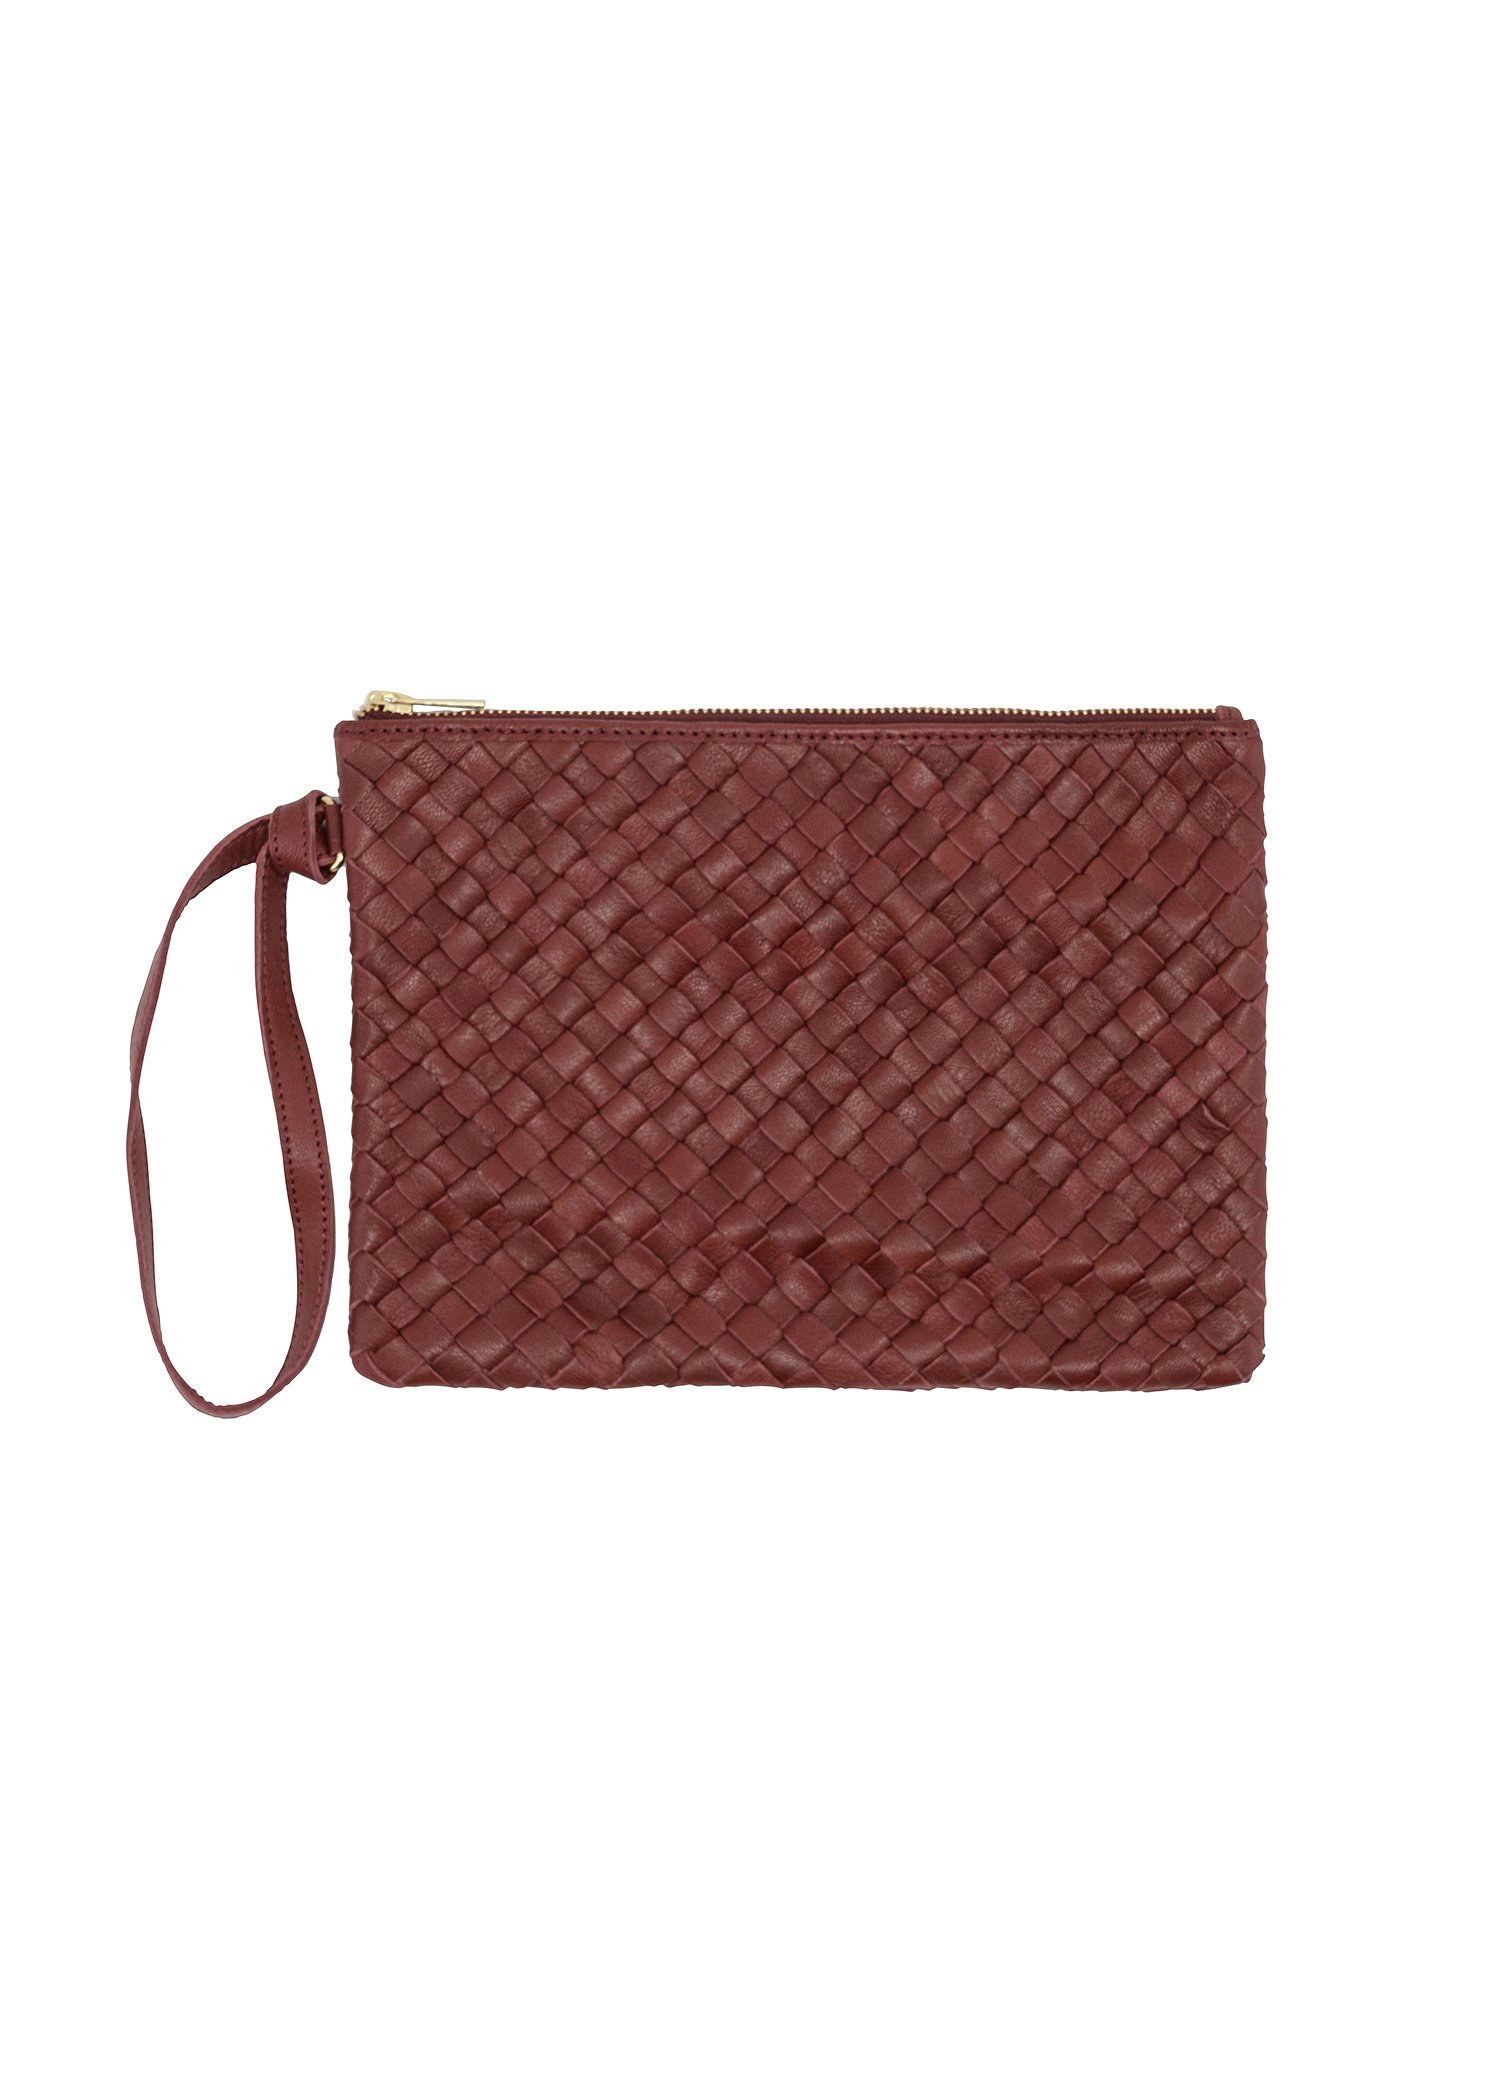 Weaved leather clutch Image 0